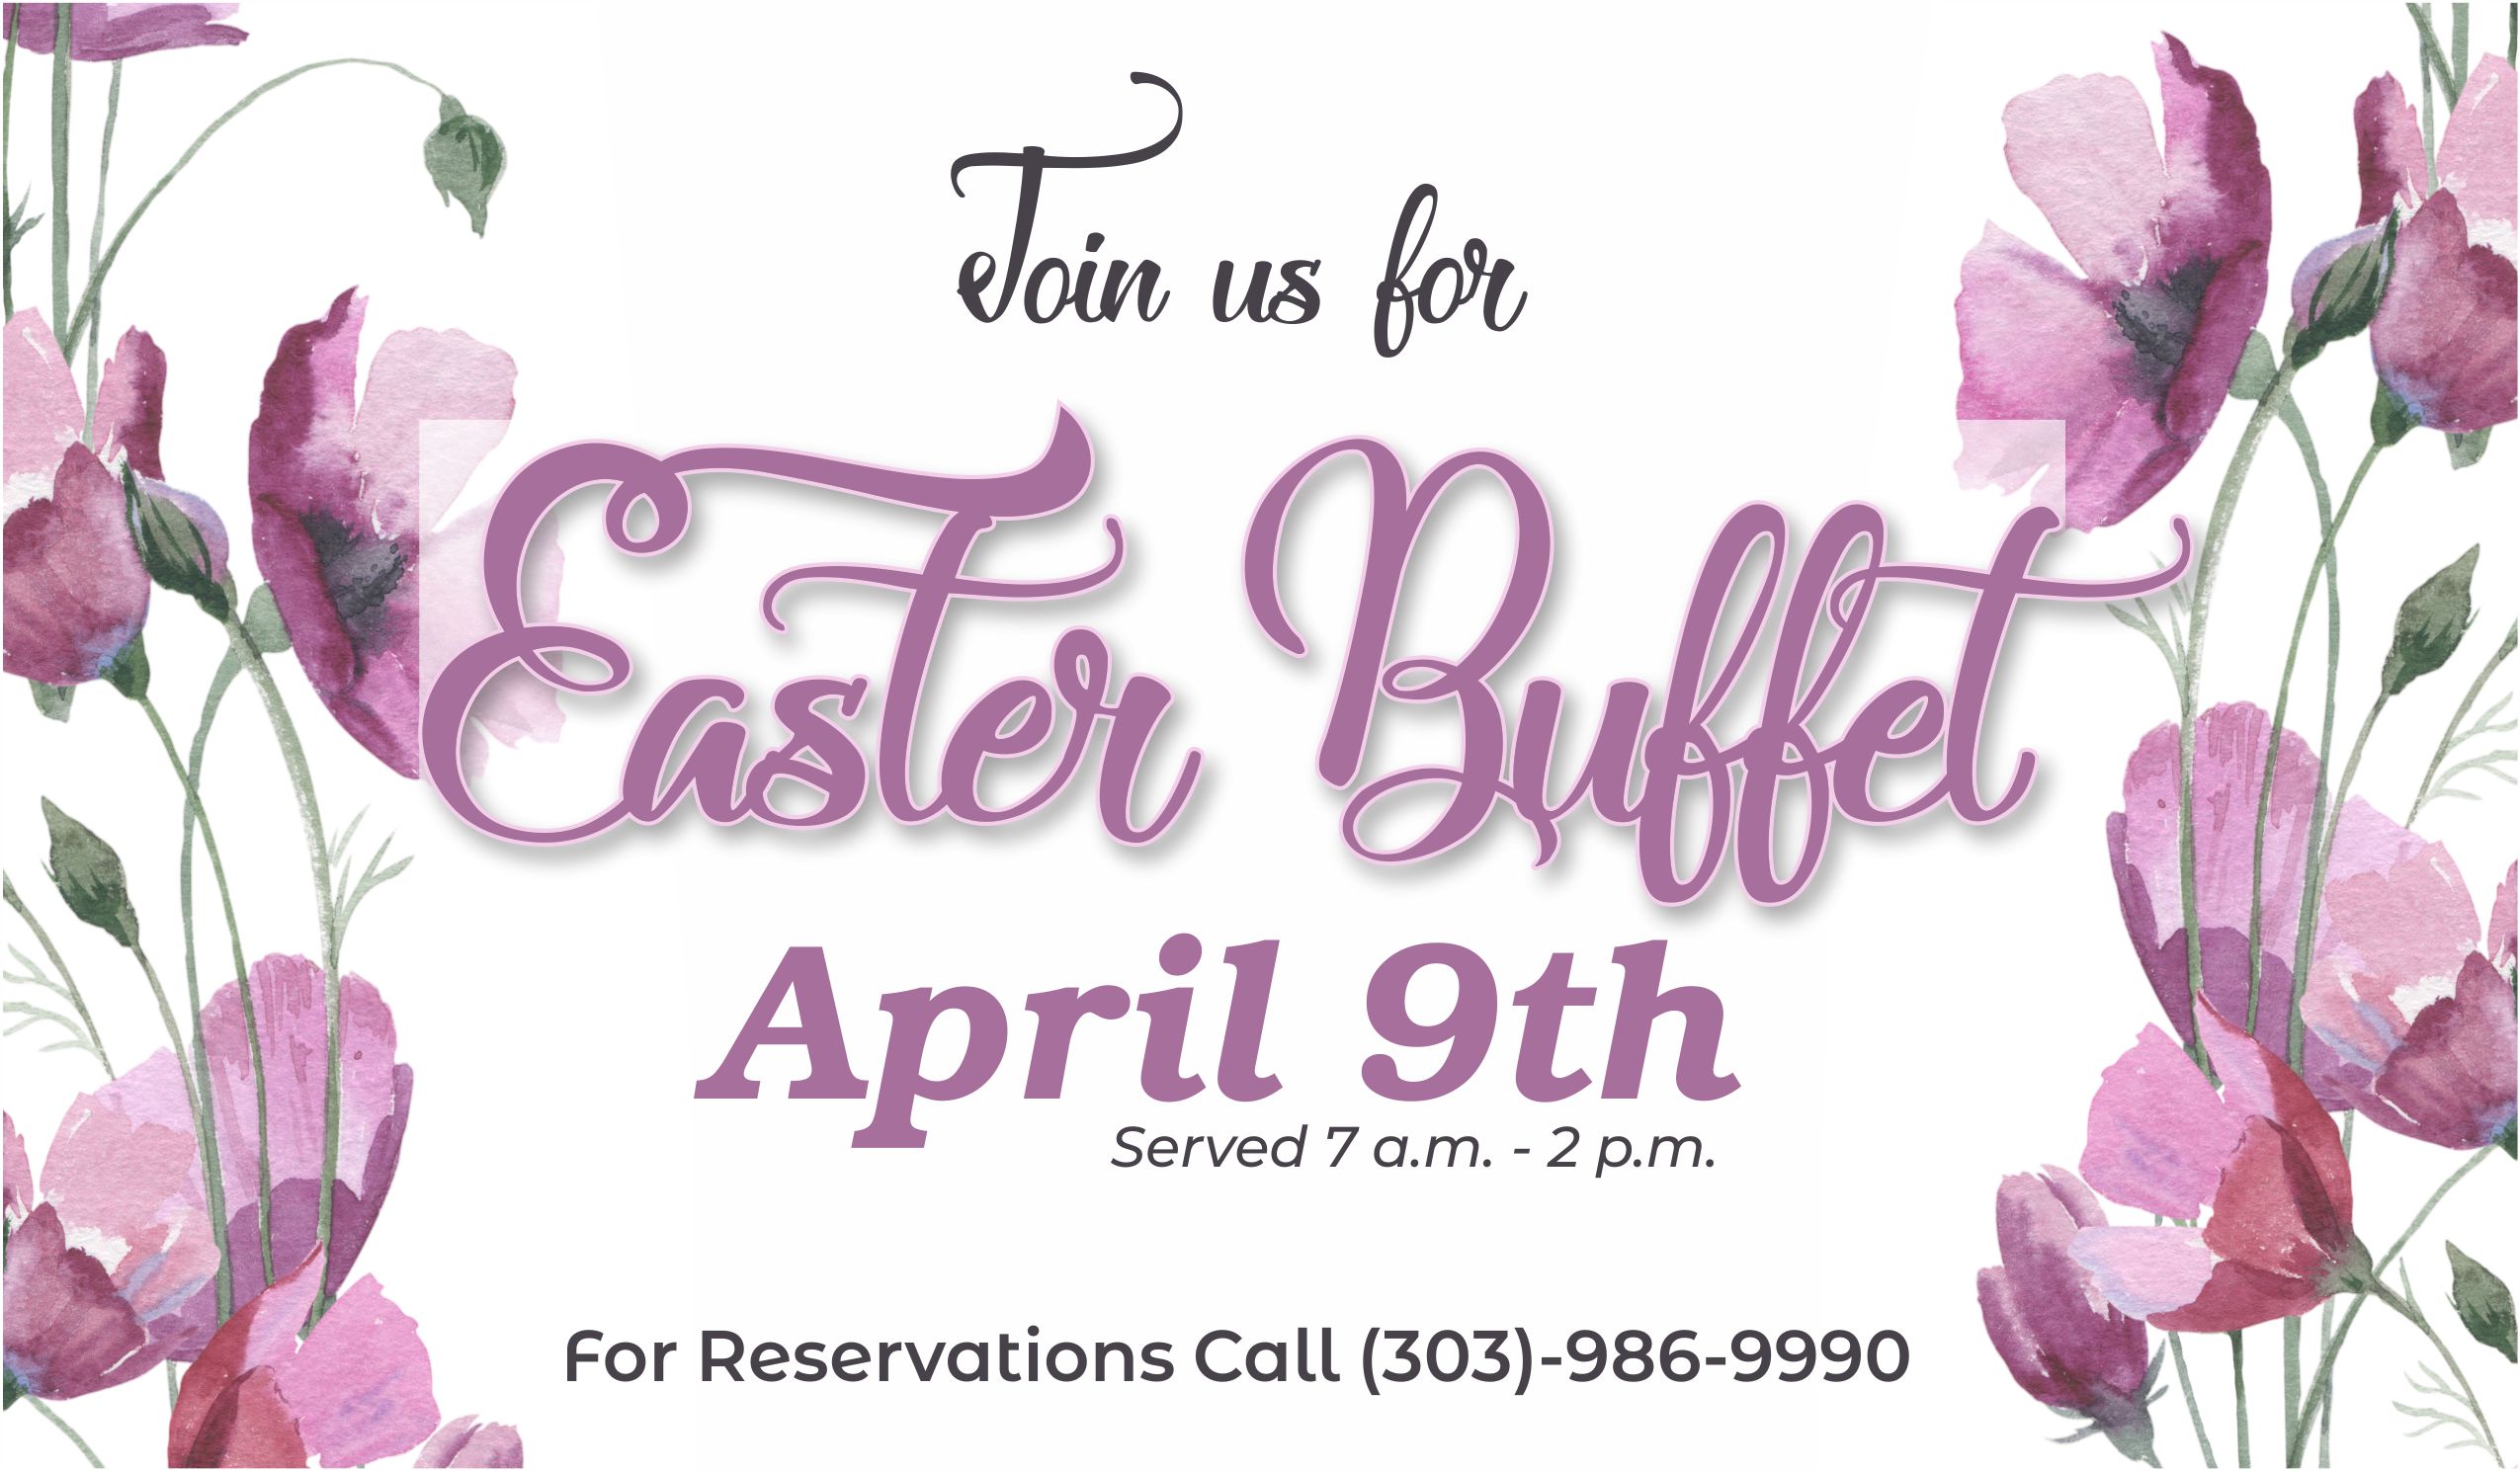 Easter Buffet at Fox Hollow April 9 by reservation